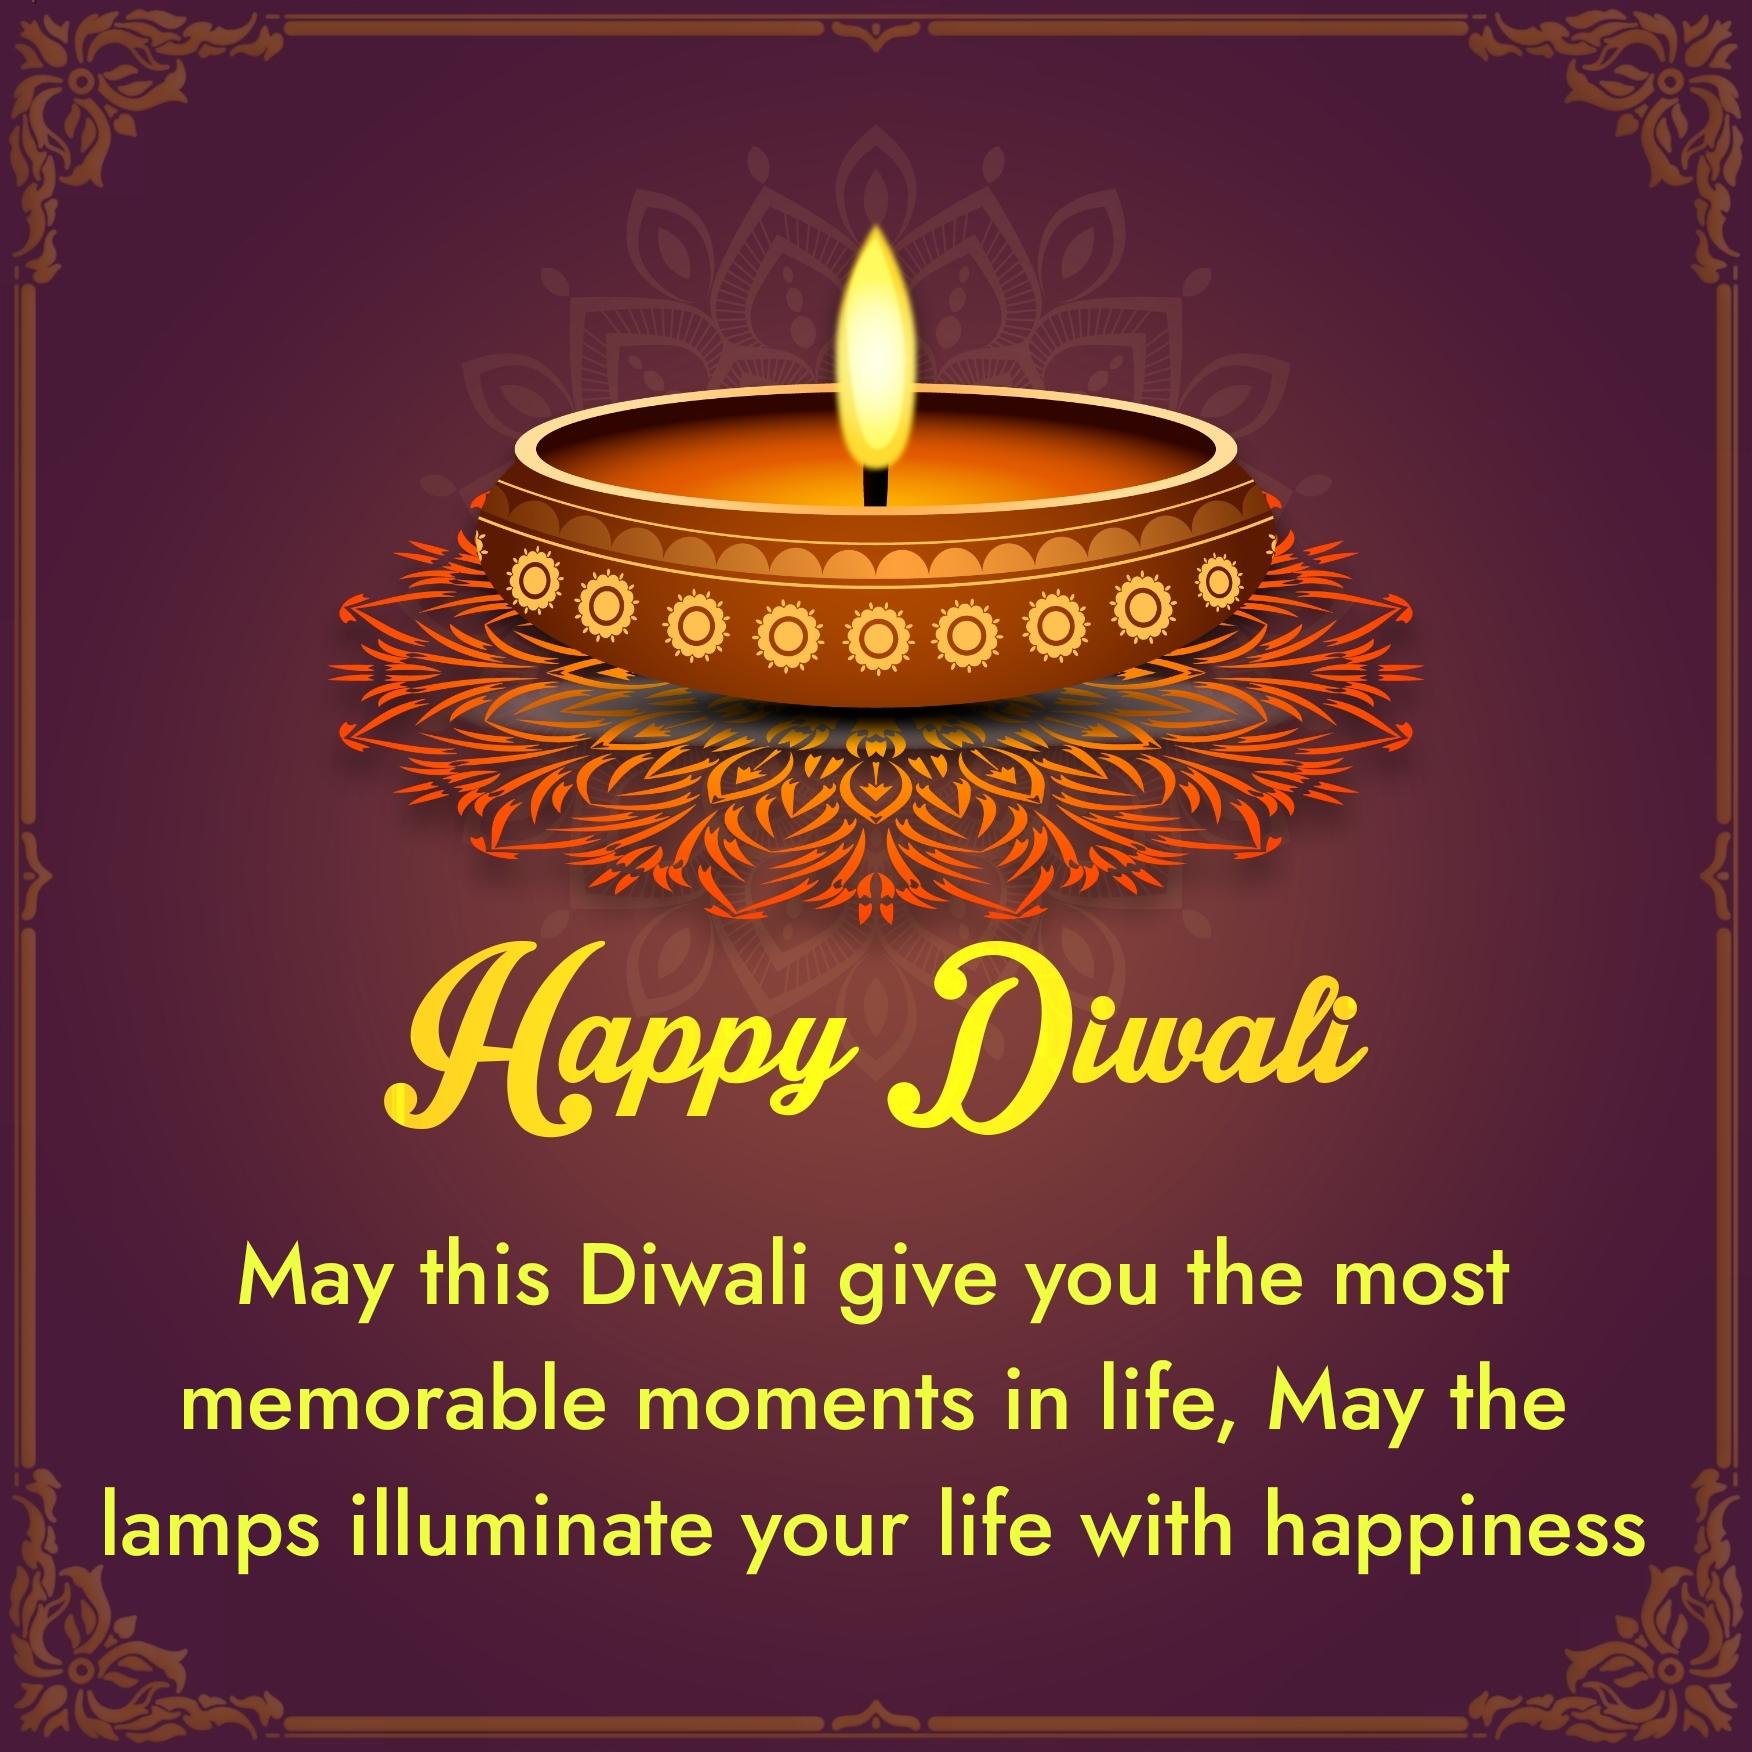 May this Diwali give you the most memorable moments in life